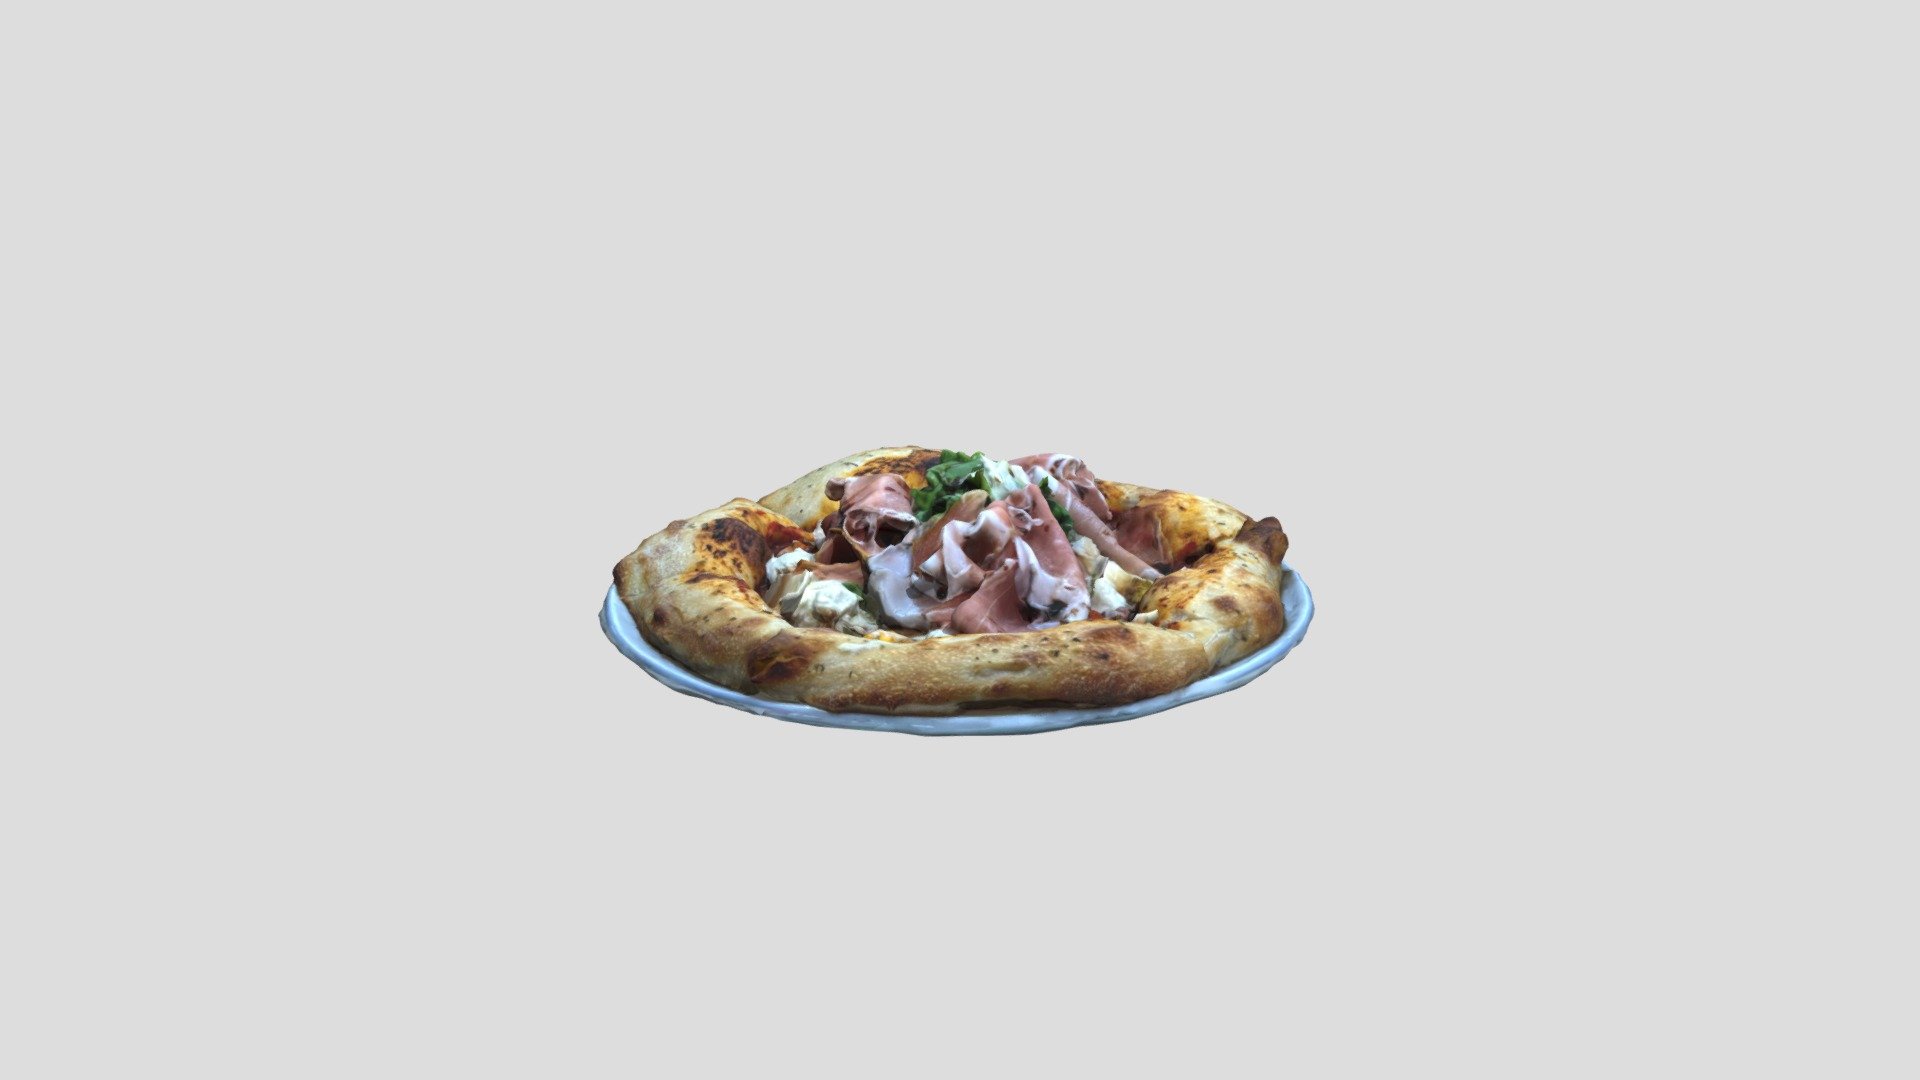 Caffe Sport Le Pizze Italiana1 - 3D model by Augmented Reality Marketing Solutions LLC (@AugRealMarketing) 3d model